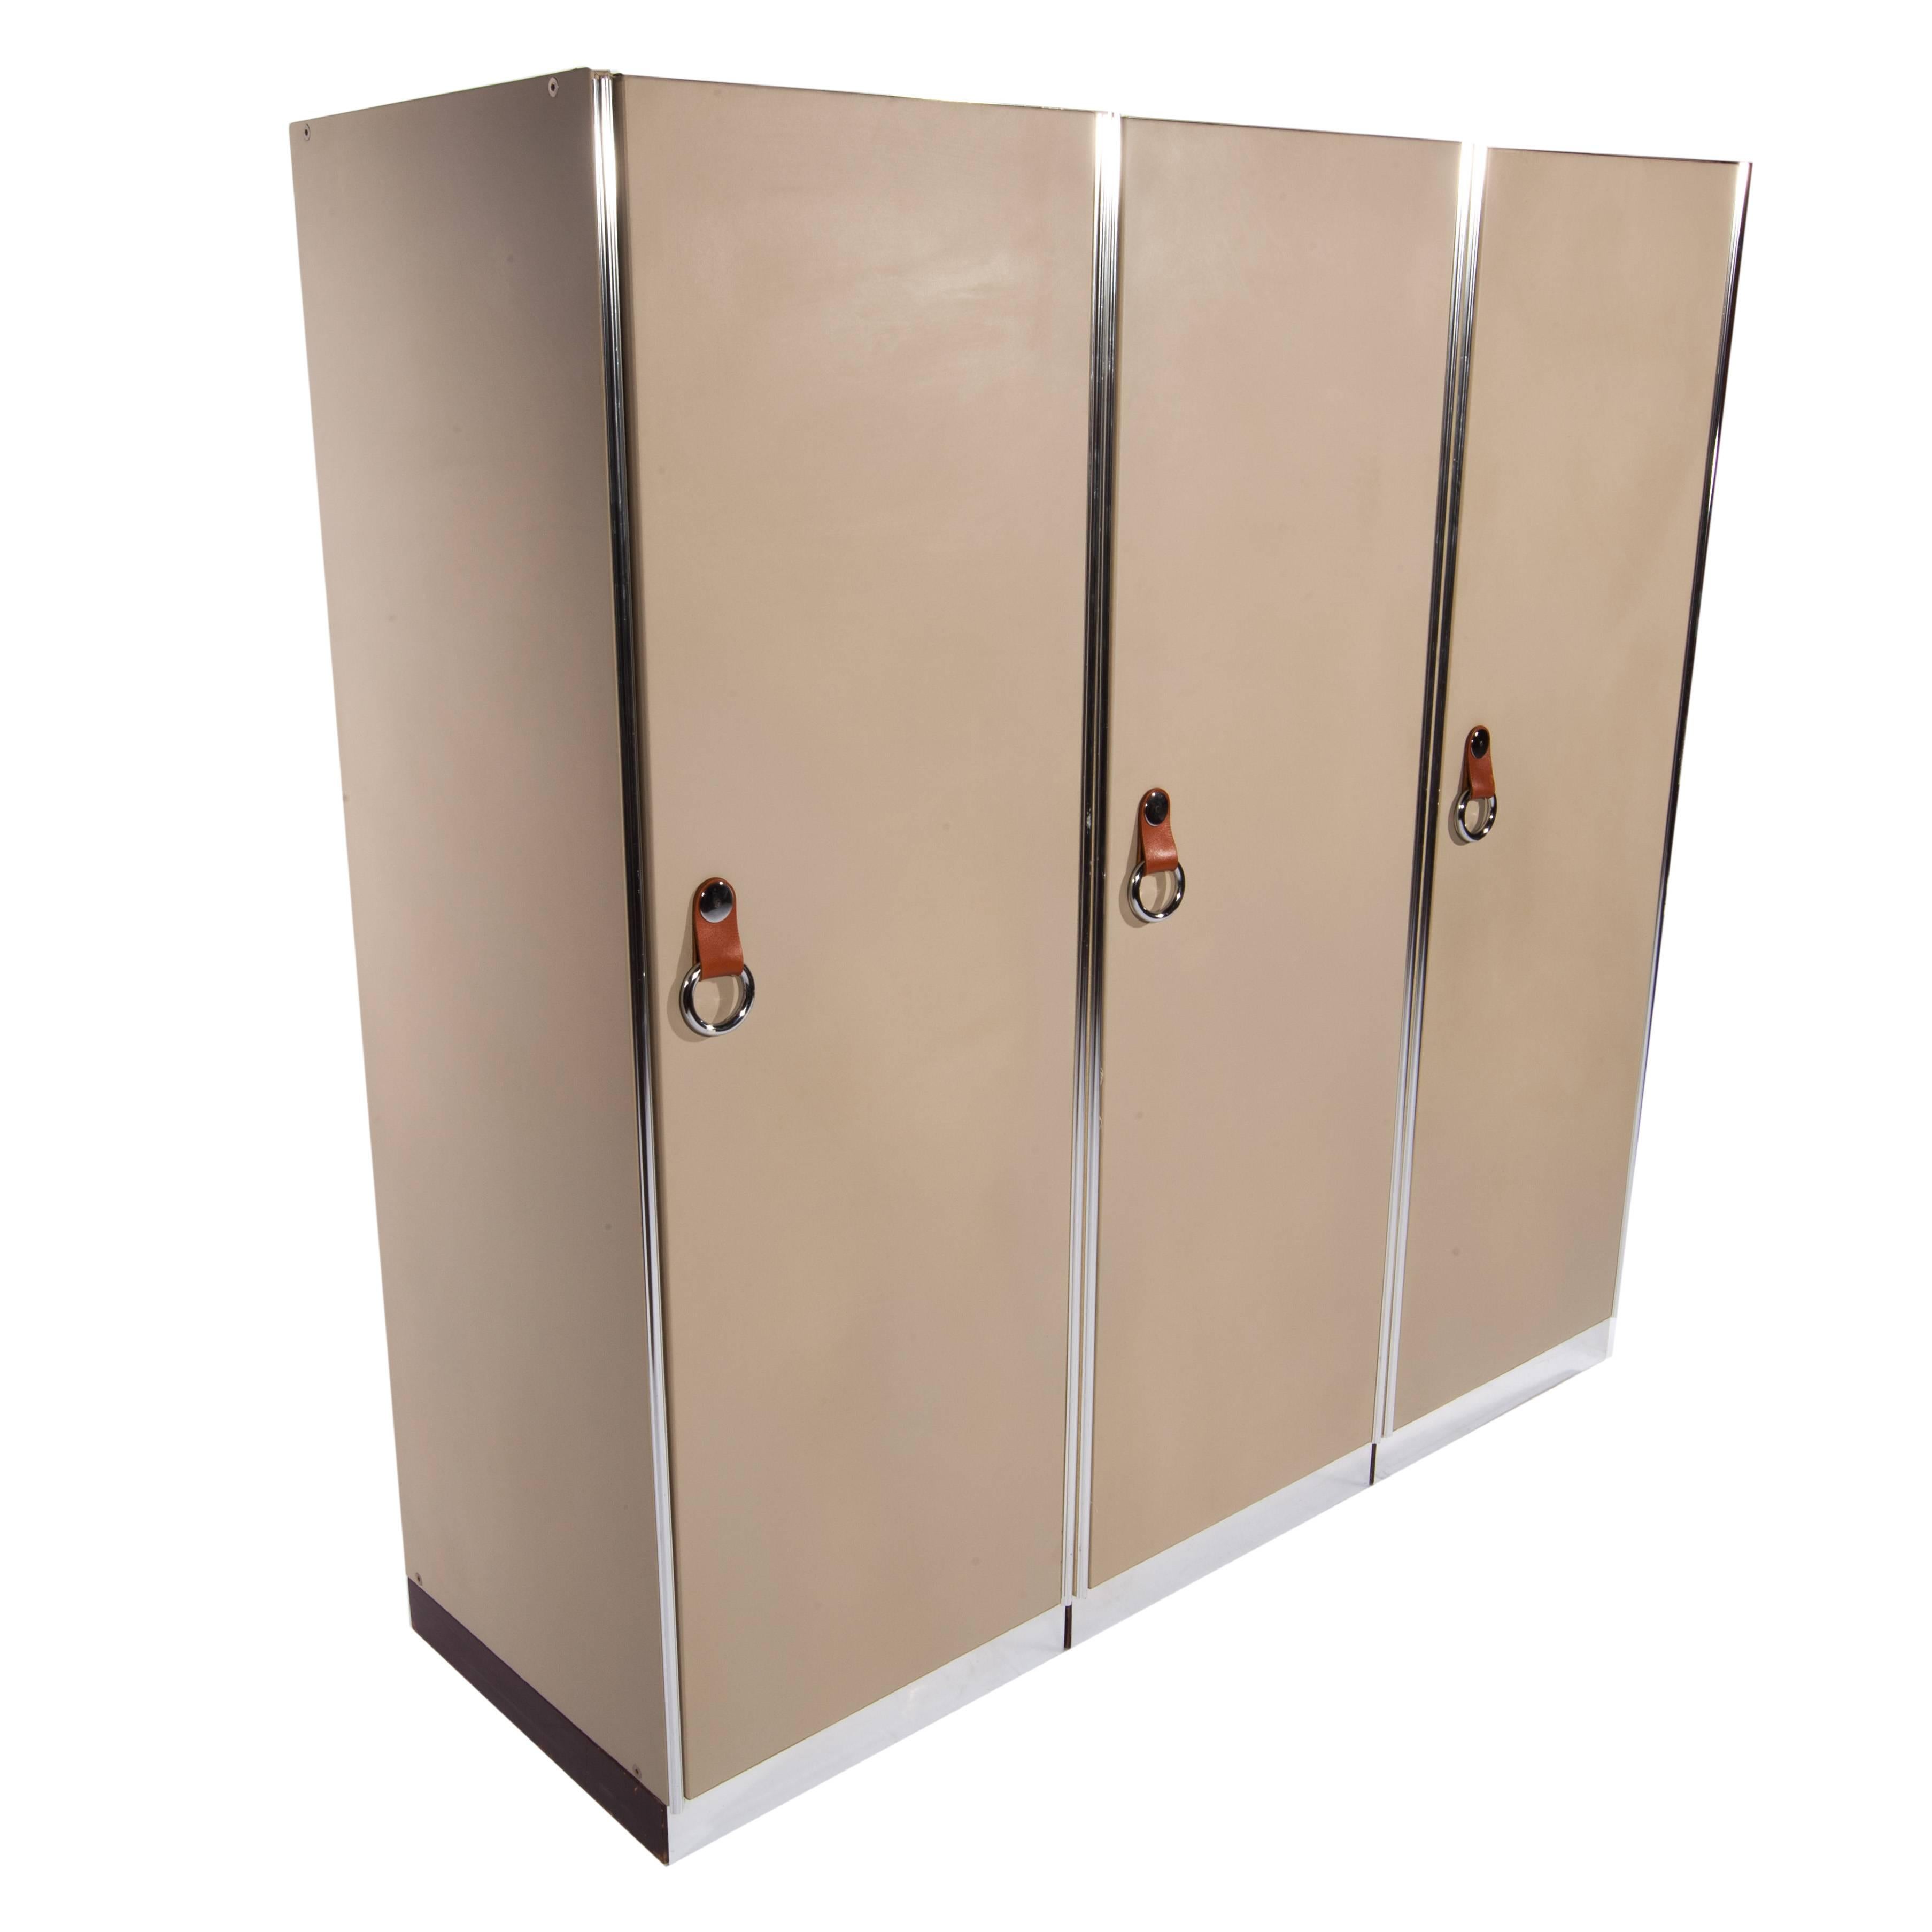 A set of three tan, leather-front cabinets for i4 Mariani/Pace, circa 1970s. Each door opens on the left and conceals an upholstered interior with a single sliding track for clothes hangers. Cabinets feature leather and chrome handles and aluminum